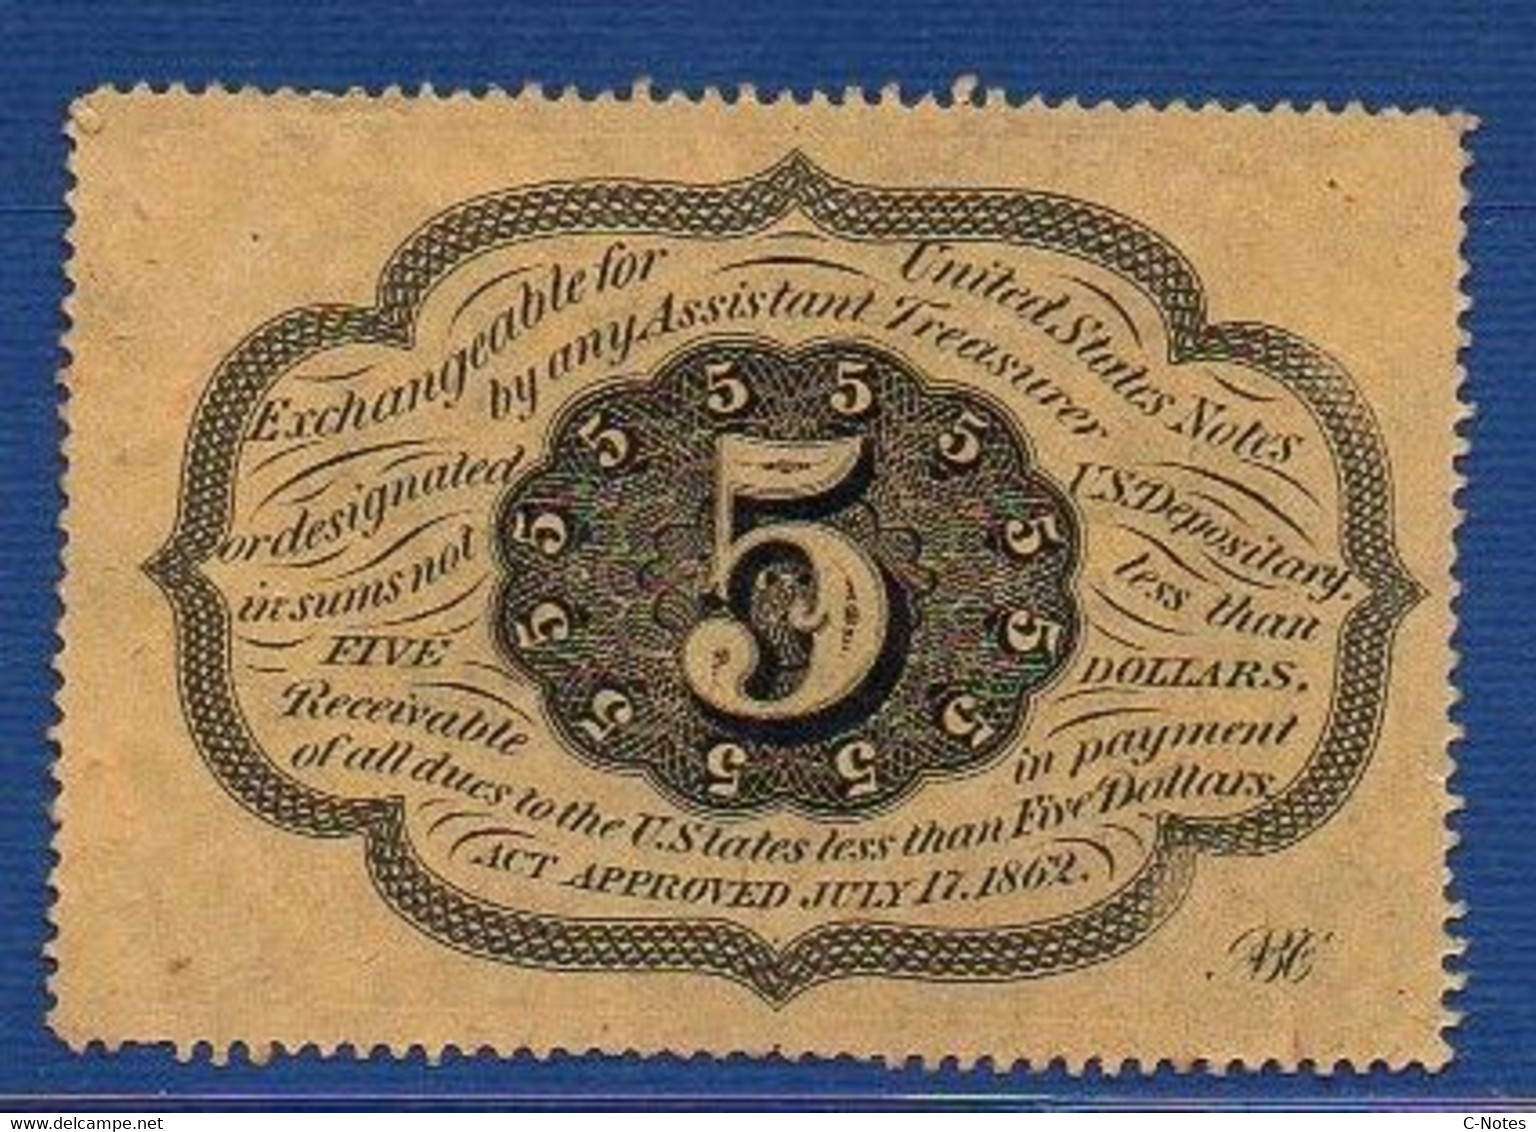 UNITED STATES OF AMERICA - P. 97a – 5 Cents 1862 AUNC, No Serial Number - 1862 : 1. Ausgabe